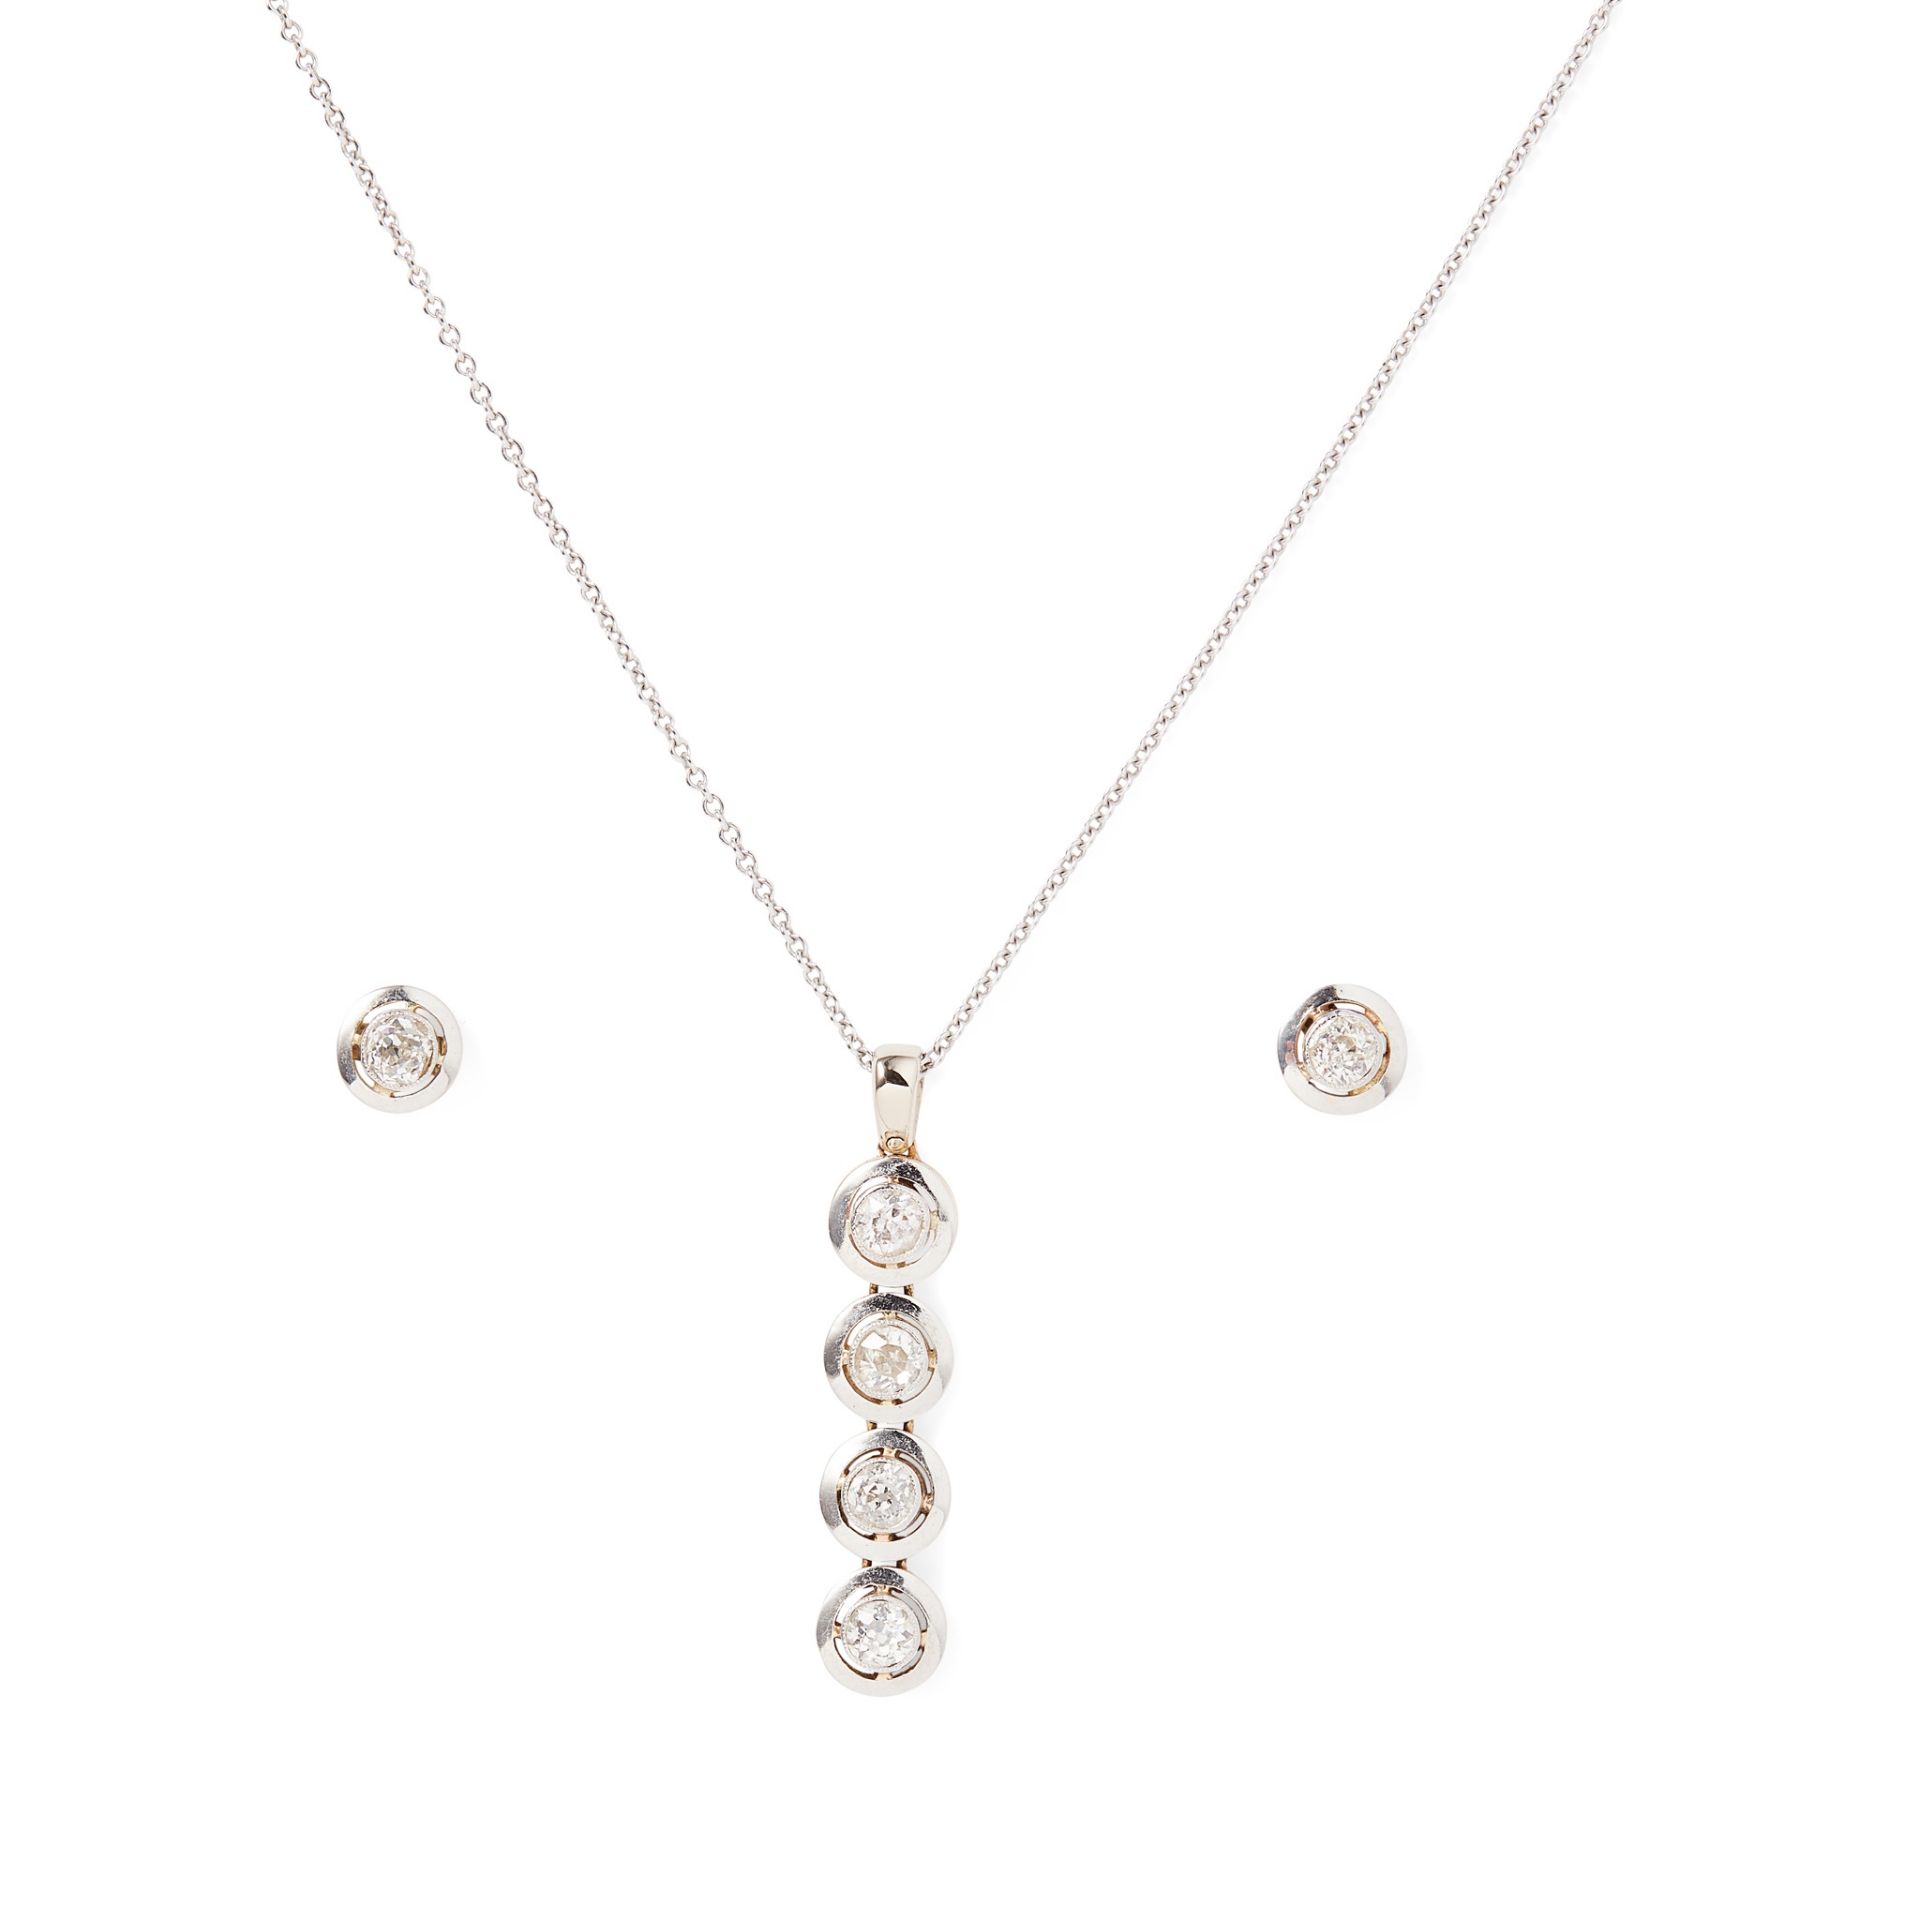 A diamond pendant and matching earrings